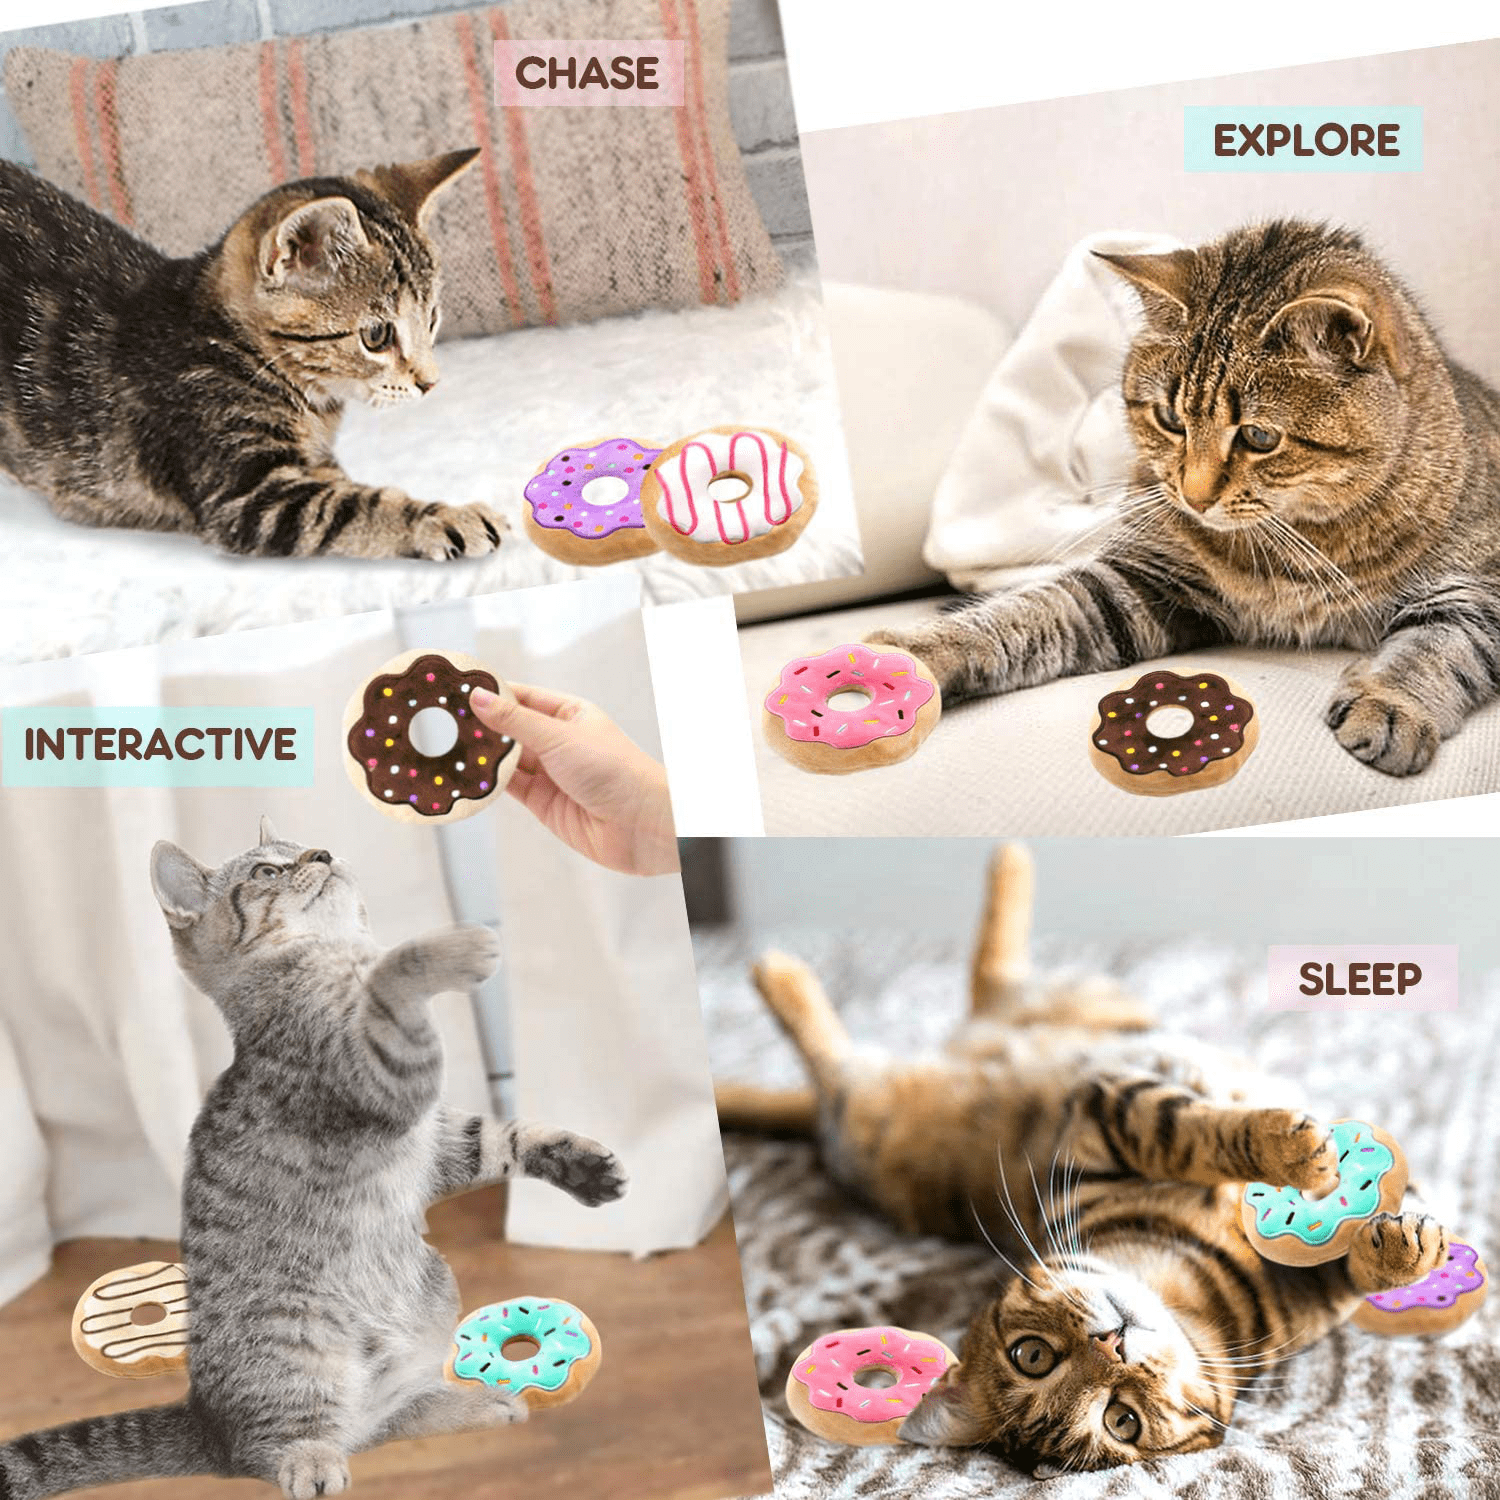 6 Pack Donut Cat Catnip Toys Kitten Chew Knickknack Sprinkles Interactive Pillows Teeth Grinding Catmint Plush Plaything Kitty Gift Ideas Supplies 4 Inches Animals & Pet Supplies > Pet Supplies > Cat Supplies > Cat Toys CiyvoLyeen   